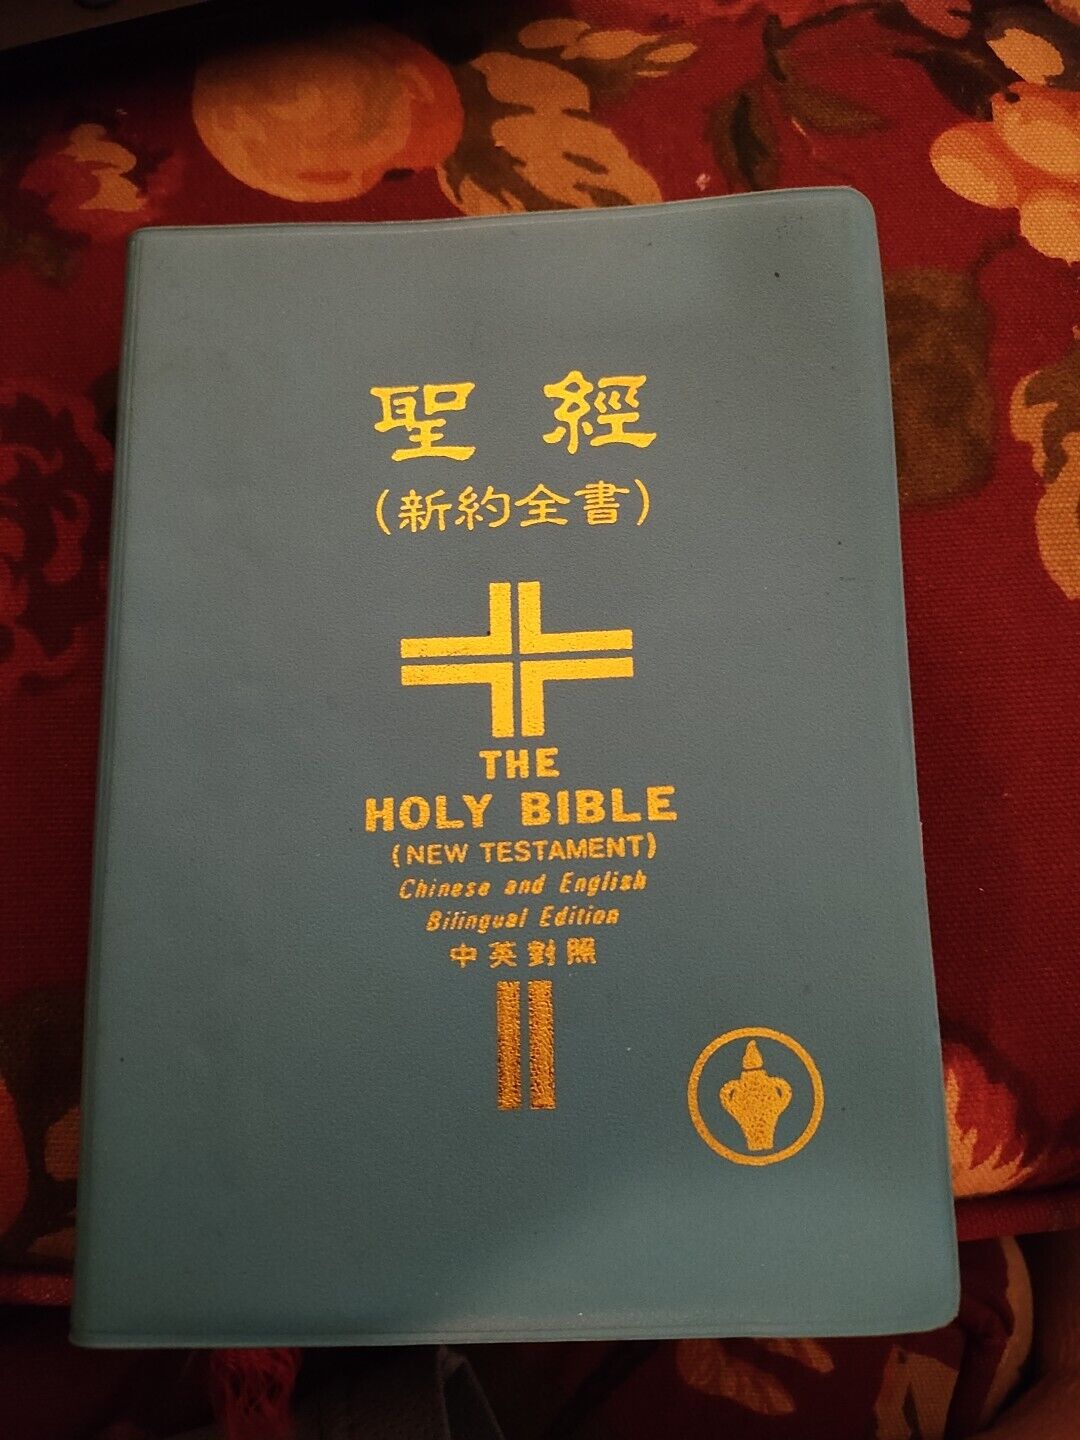 The Holy Bible New Testament Chinese and English bilingual edition